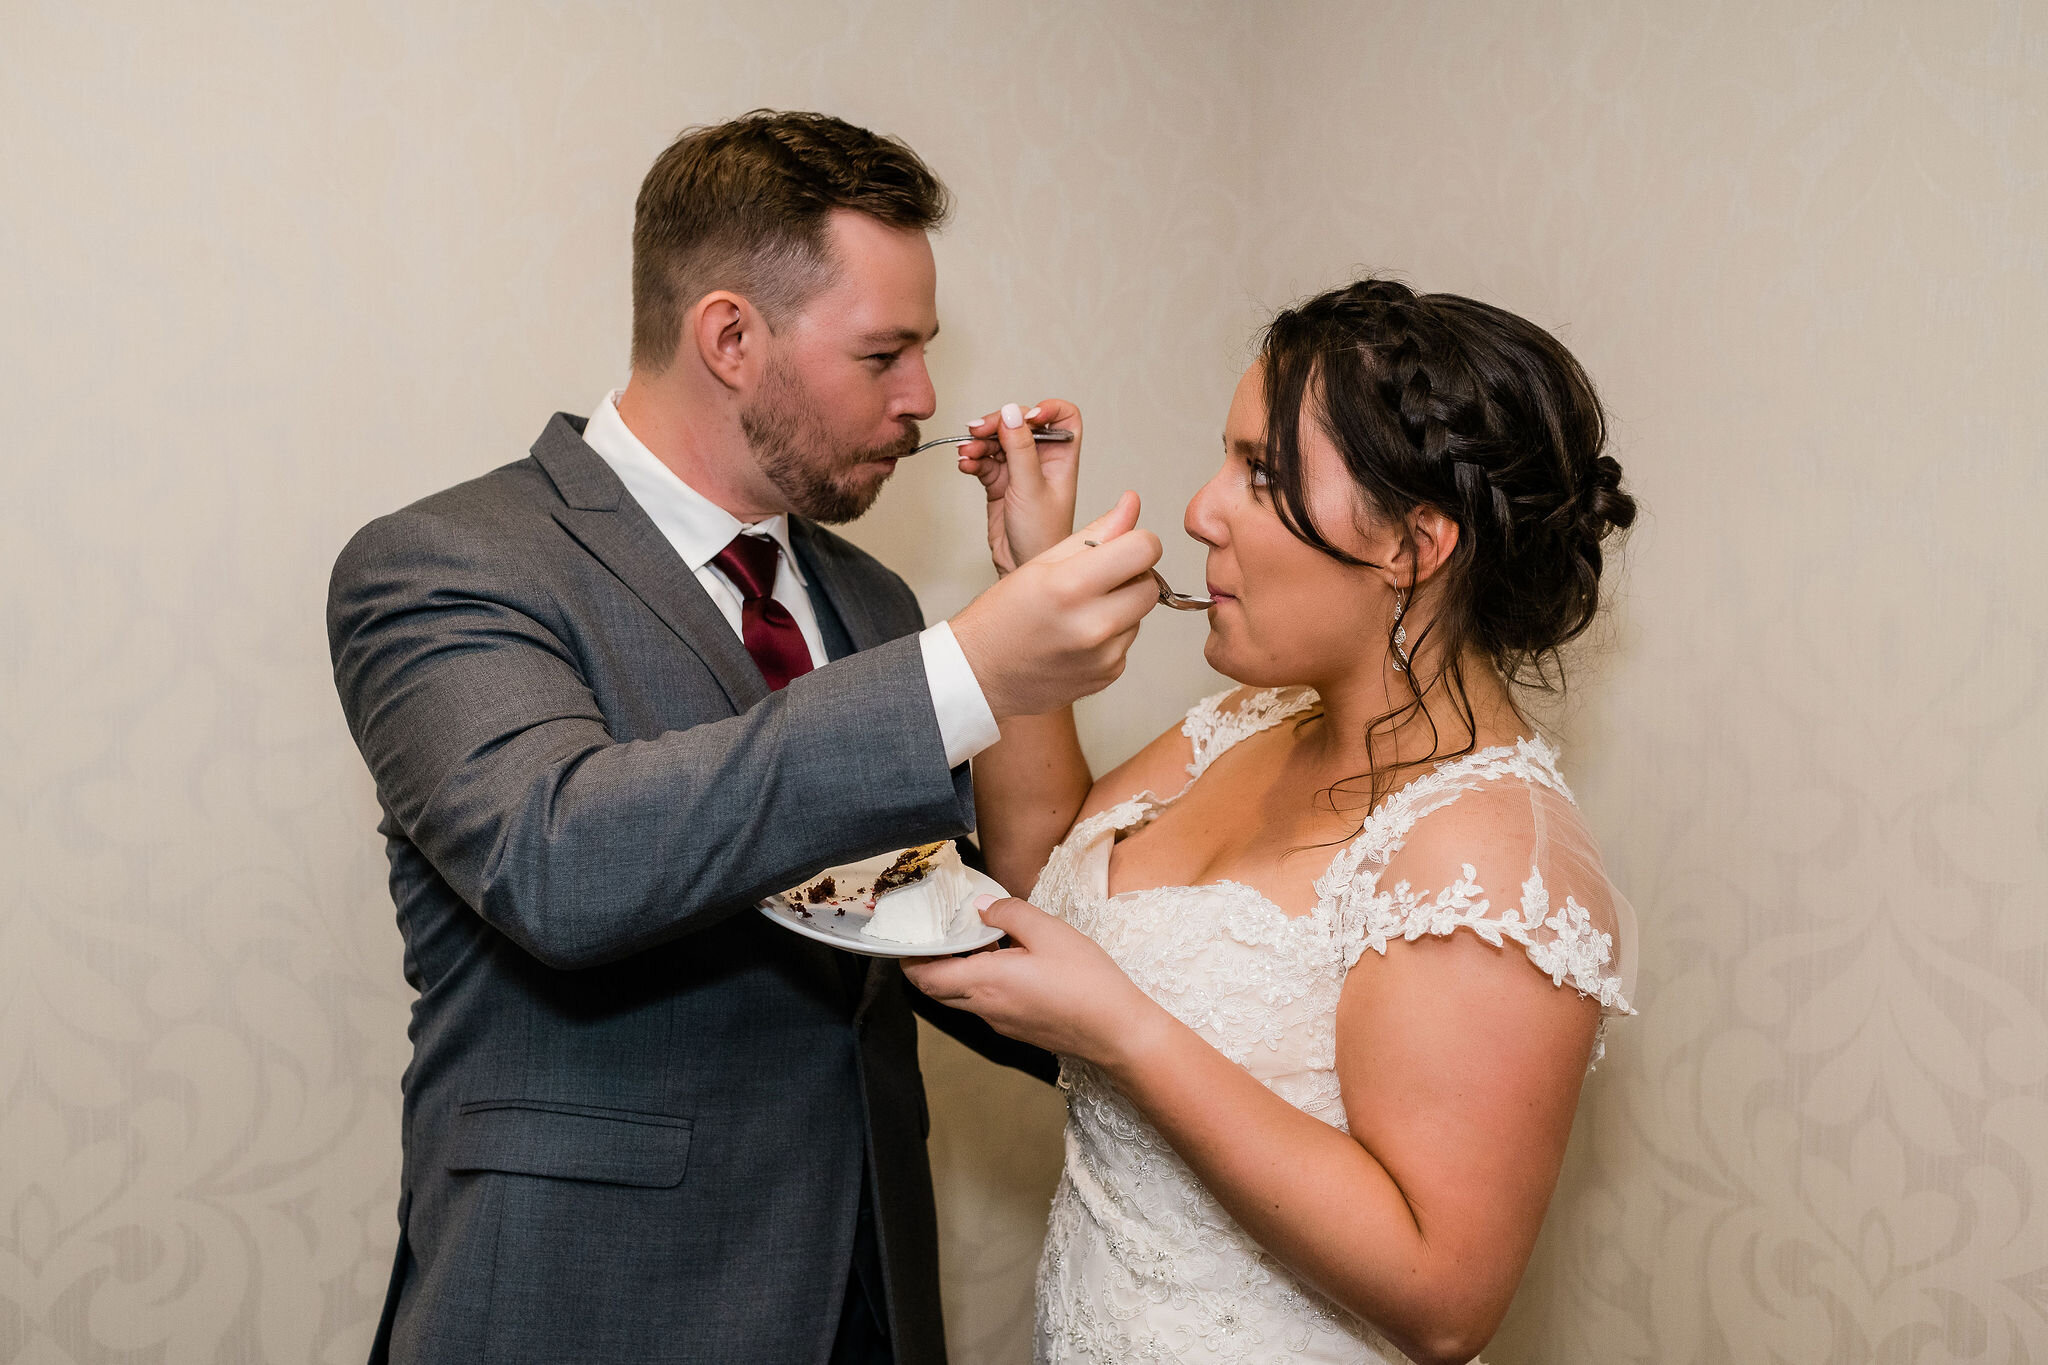 Bride and groom feeding each other cake